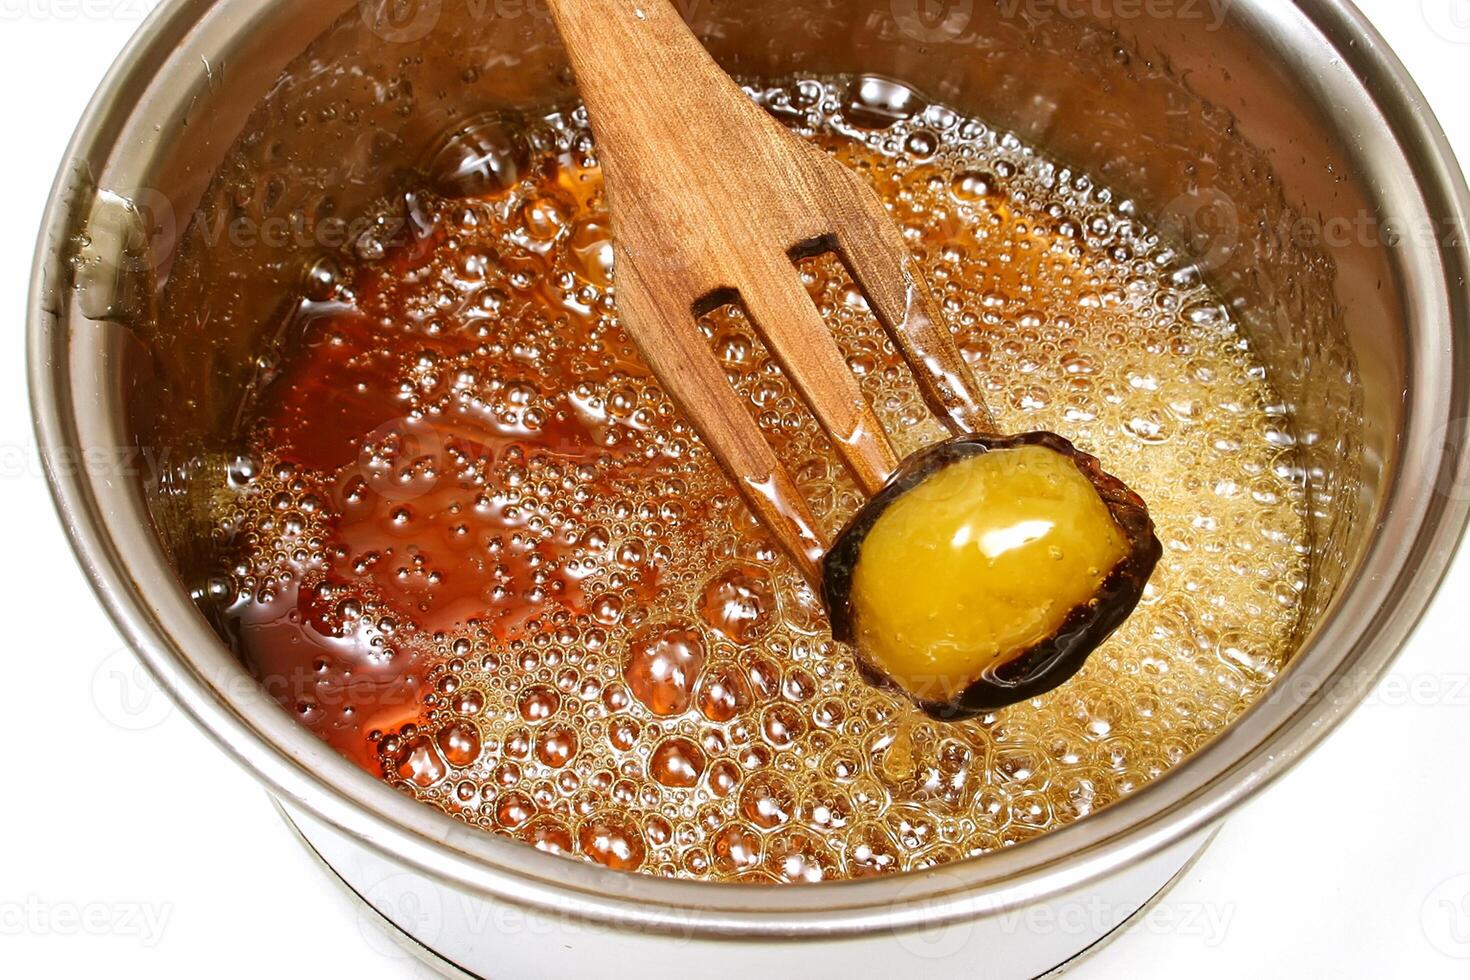 Brazilian sweet, mother-in-law's eye, being caramelized in the pan photo